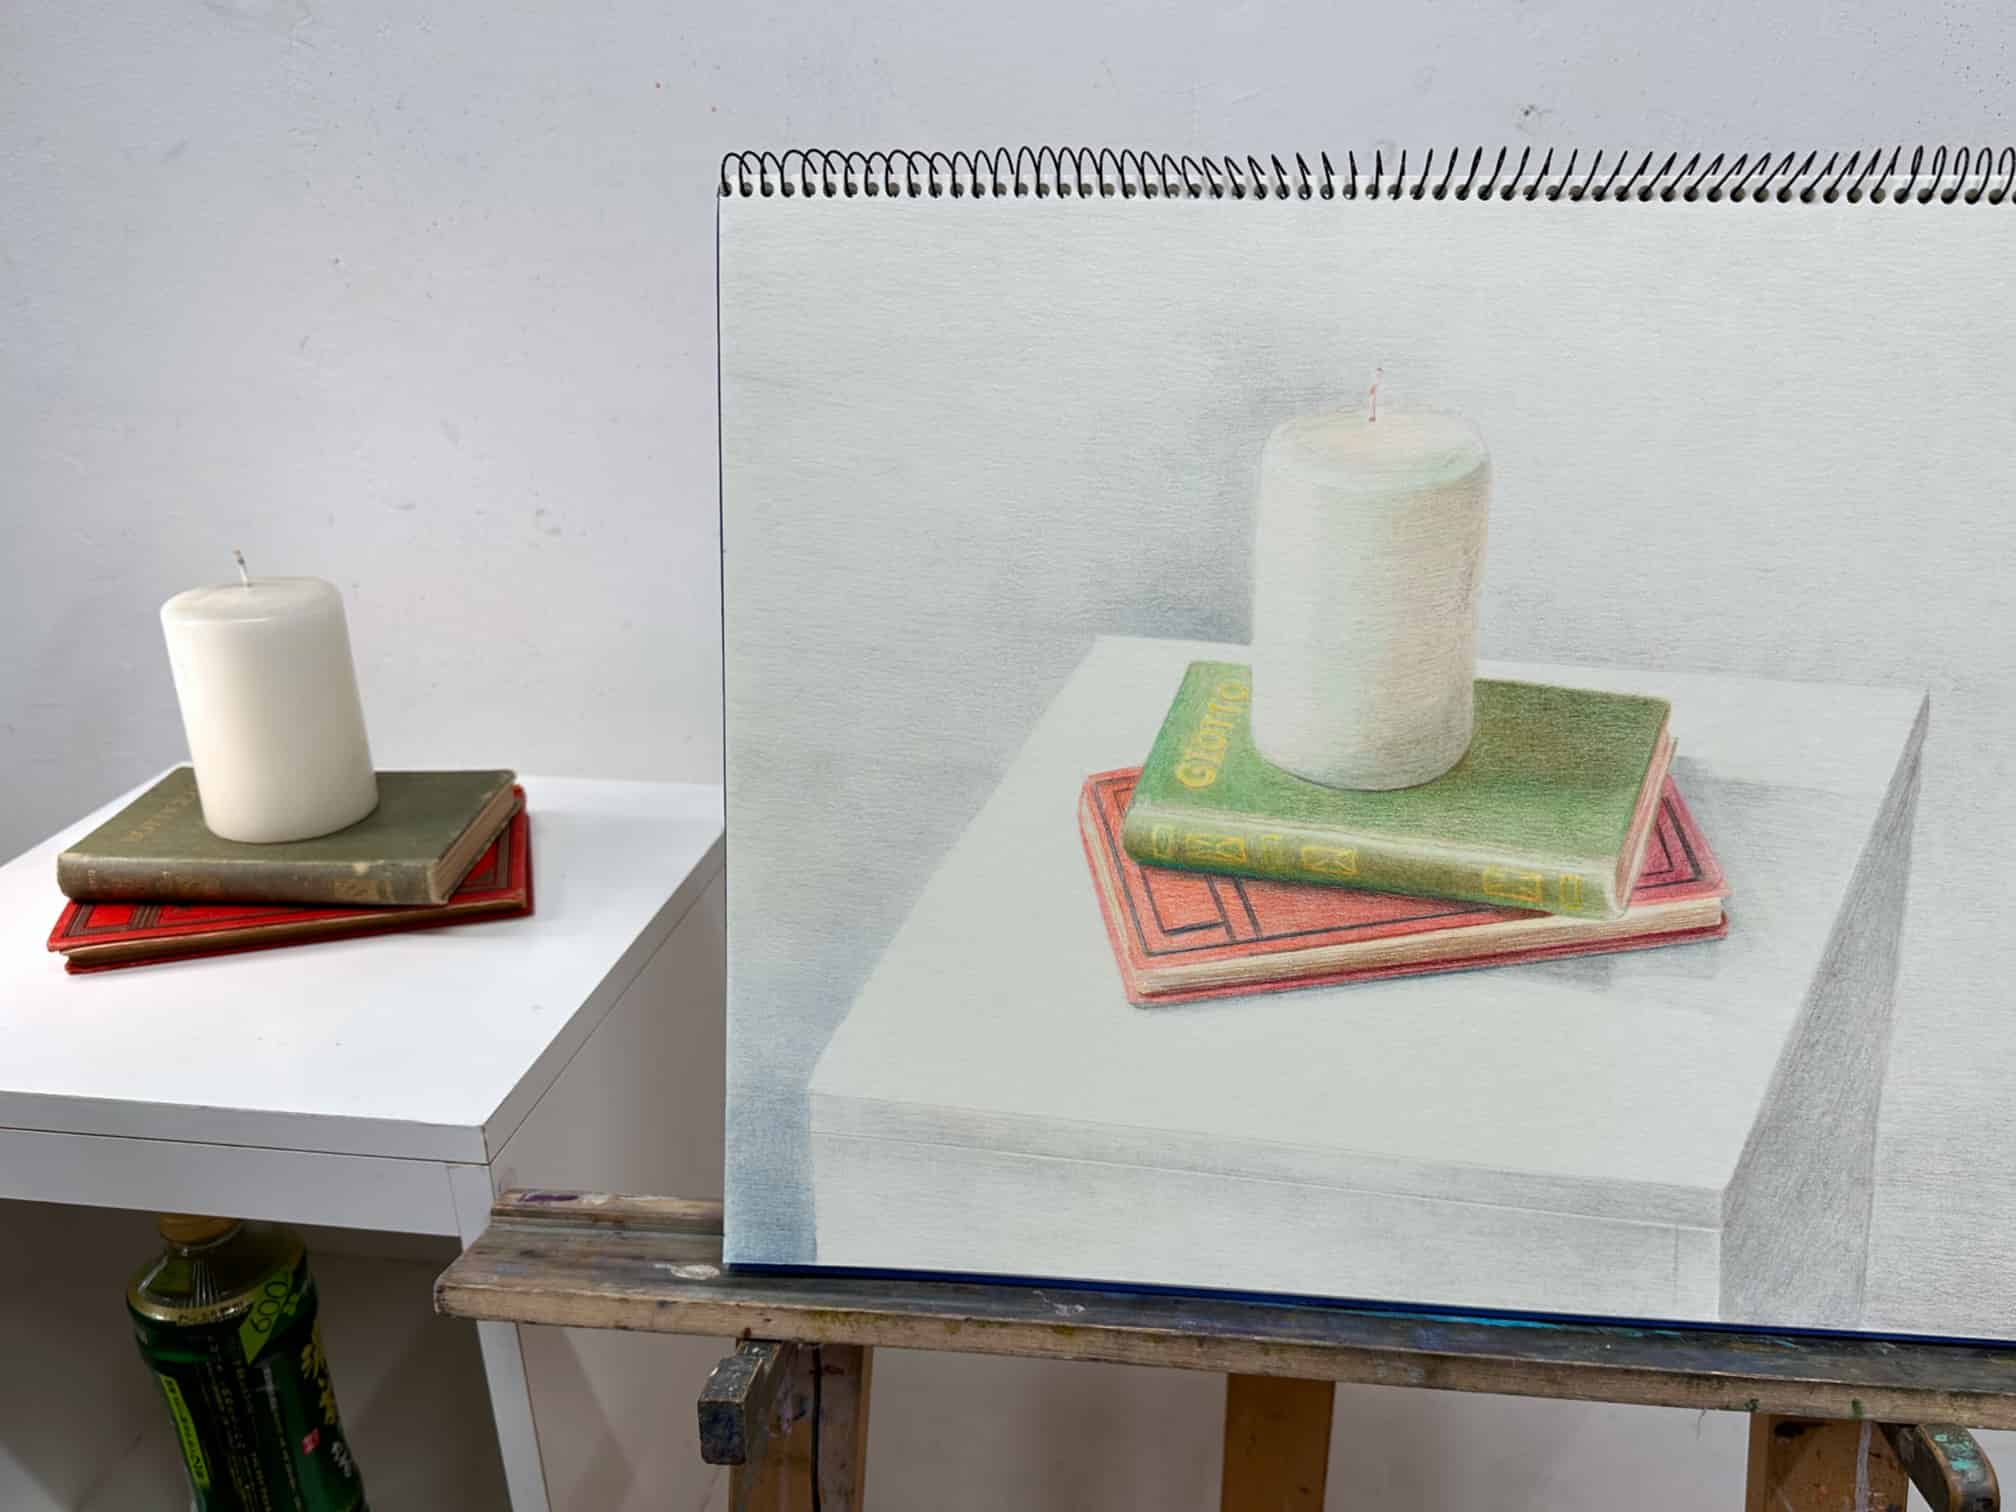 Colored pencil still life drawing by Alessandro Cuzzocrea. The drawing, displayed on a sketchpad, shows a realistic depiction of a white candle resting on top of two books with green and red covers. The artwork is placed on an easel, and the actual setup of the candle and books is visible beside it, allowing for a comparison between the drawn and real objects